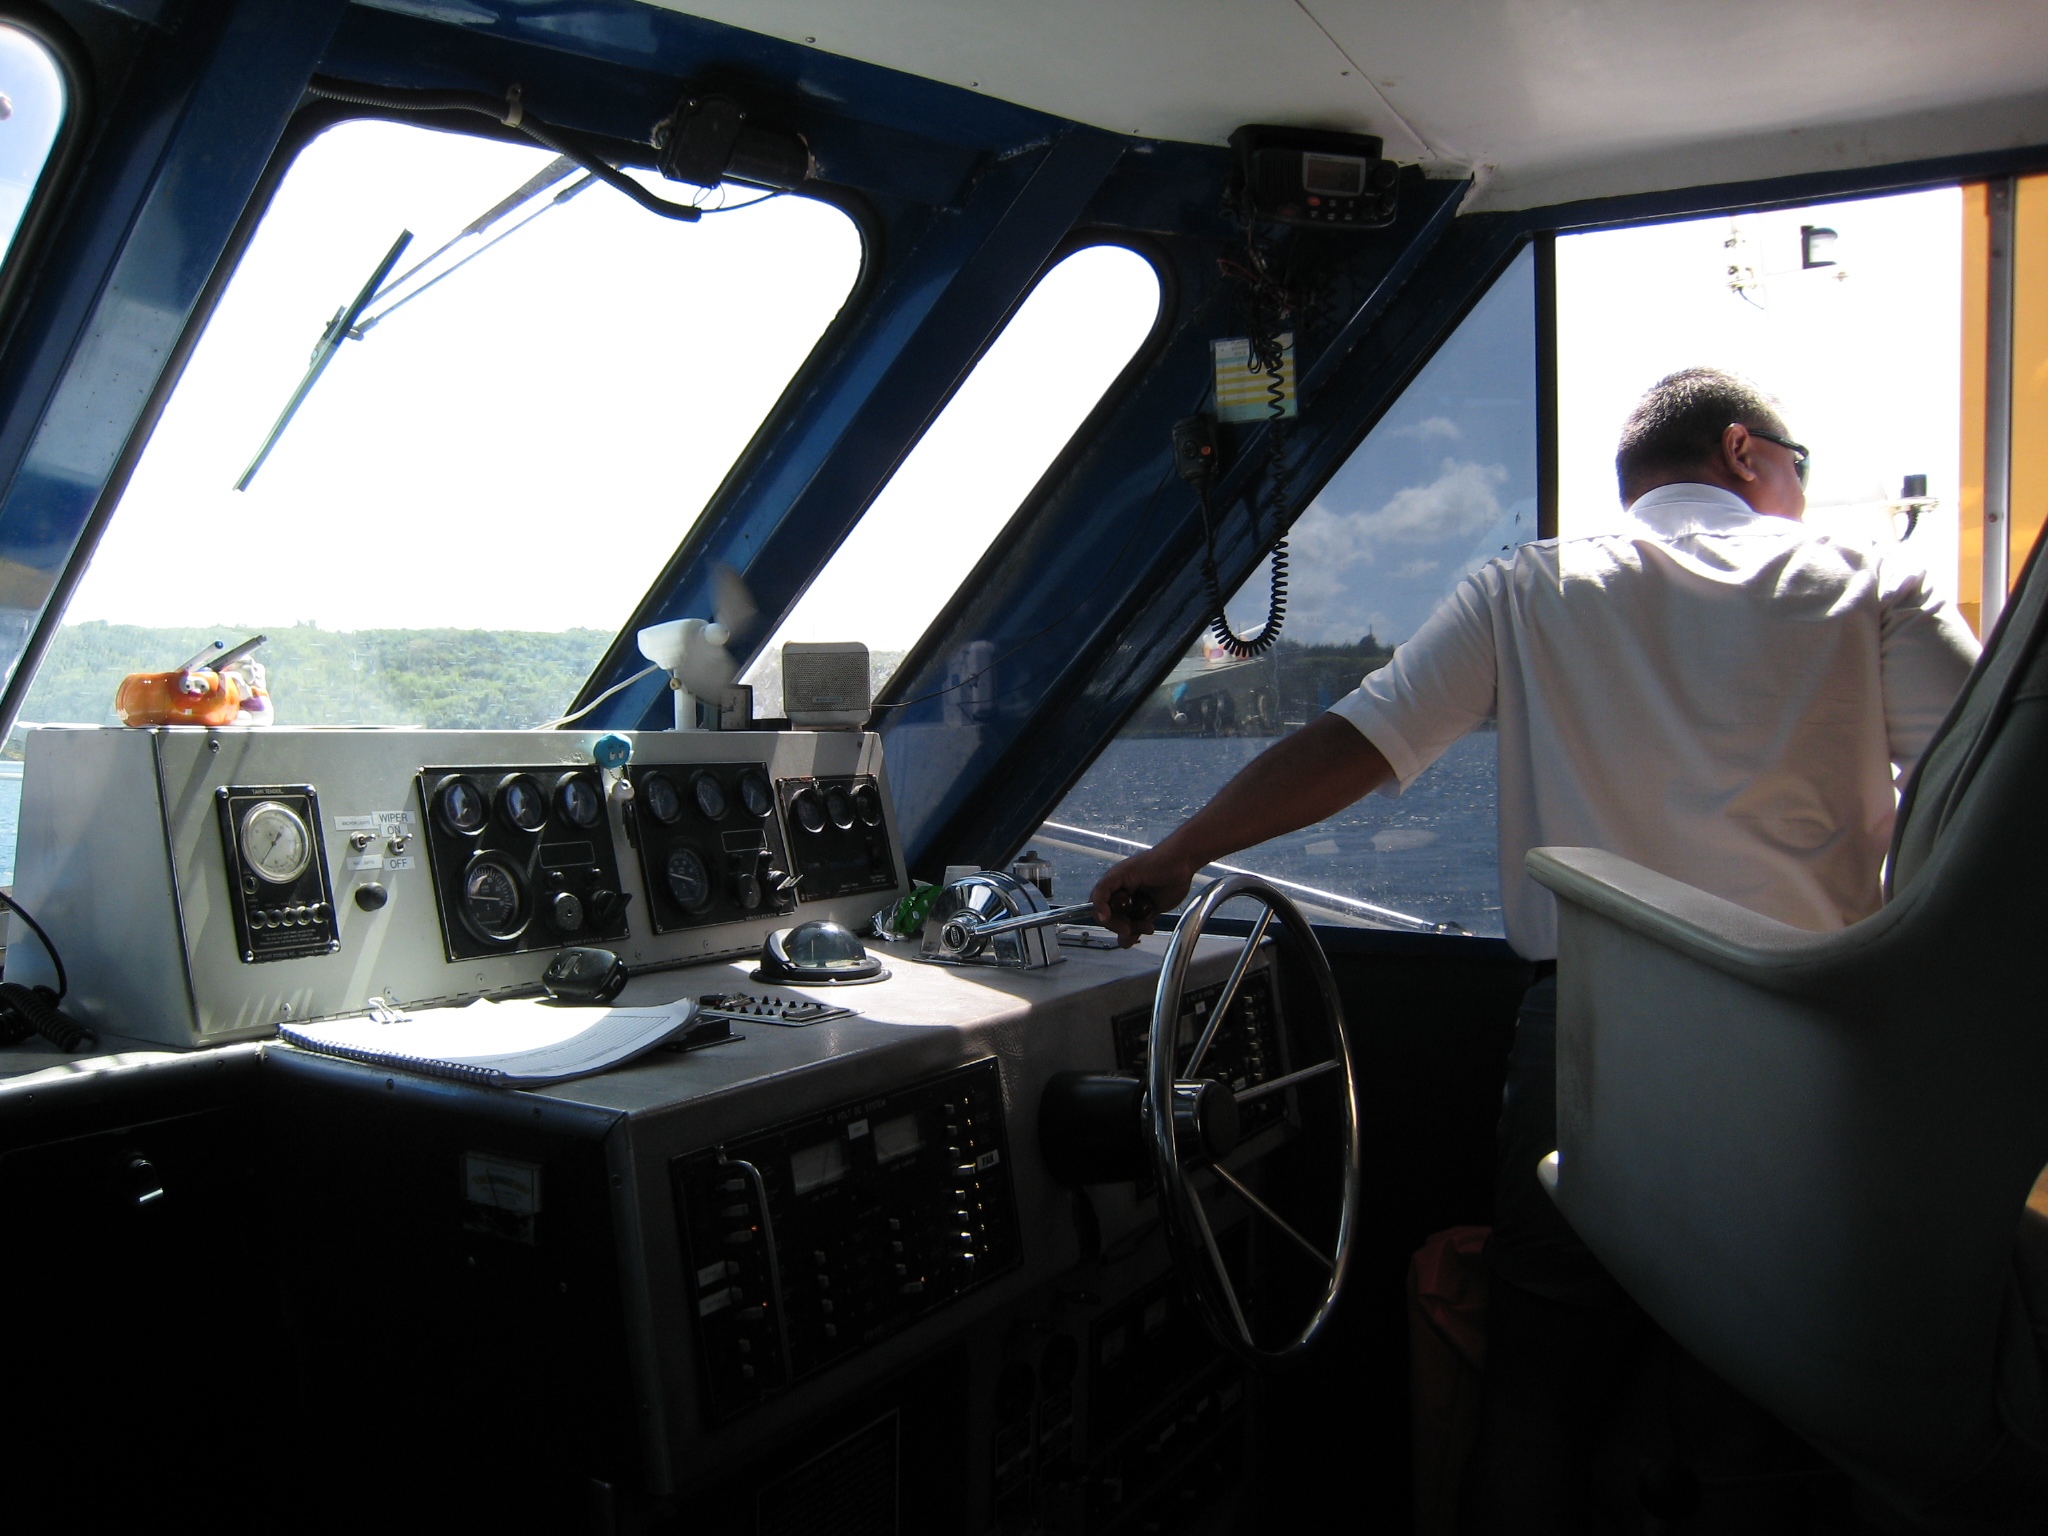 a man stands inside a boat's cockpit overlooking the water